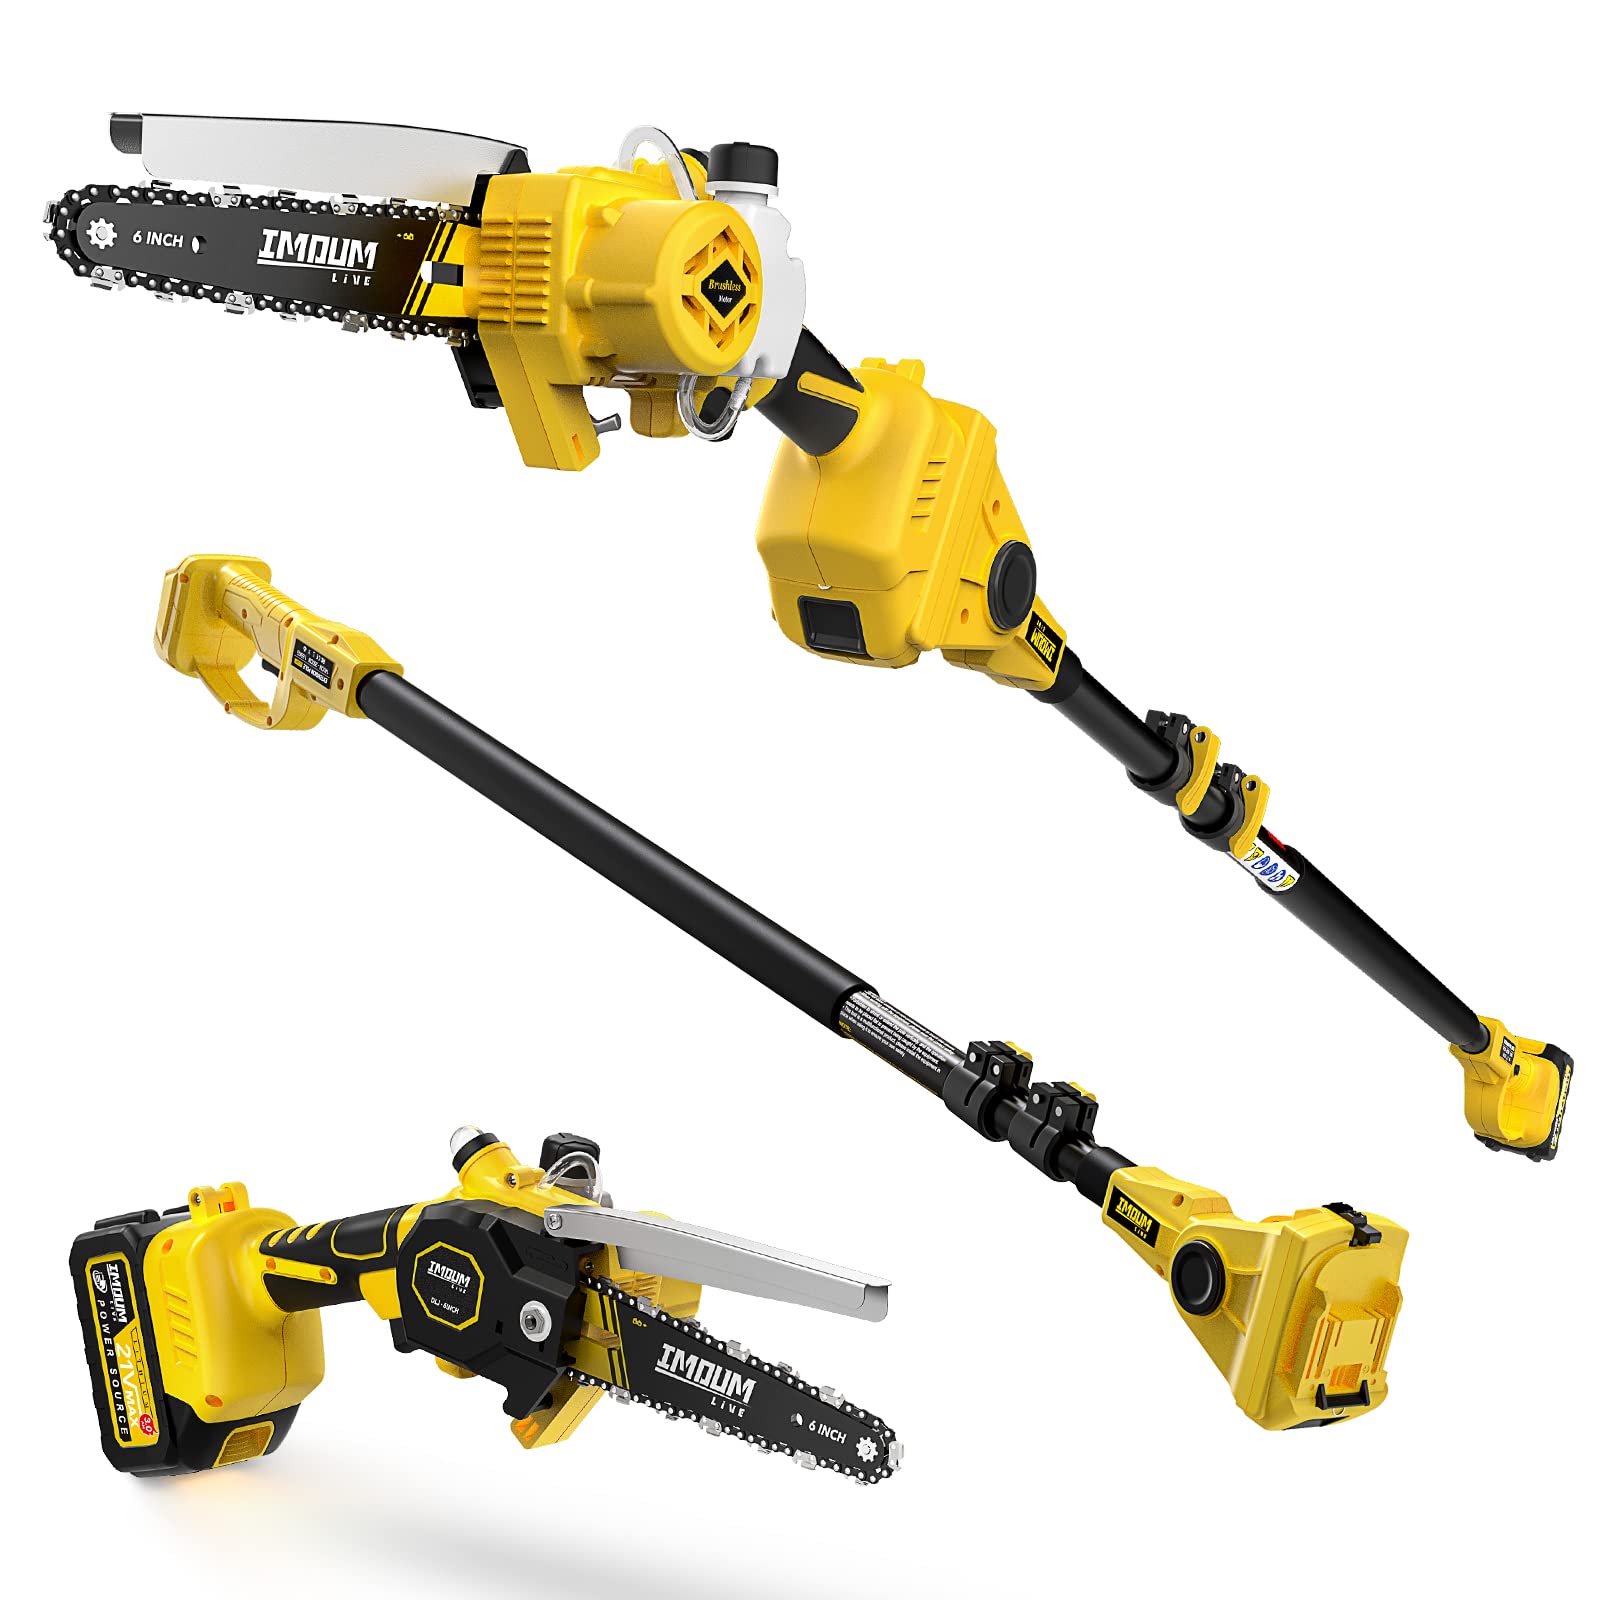 2-in-1 Brushless Pole Saw & 6 Inch Mini Chainsaw